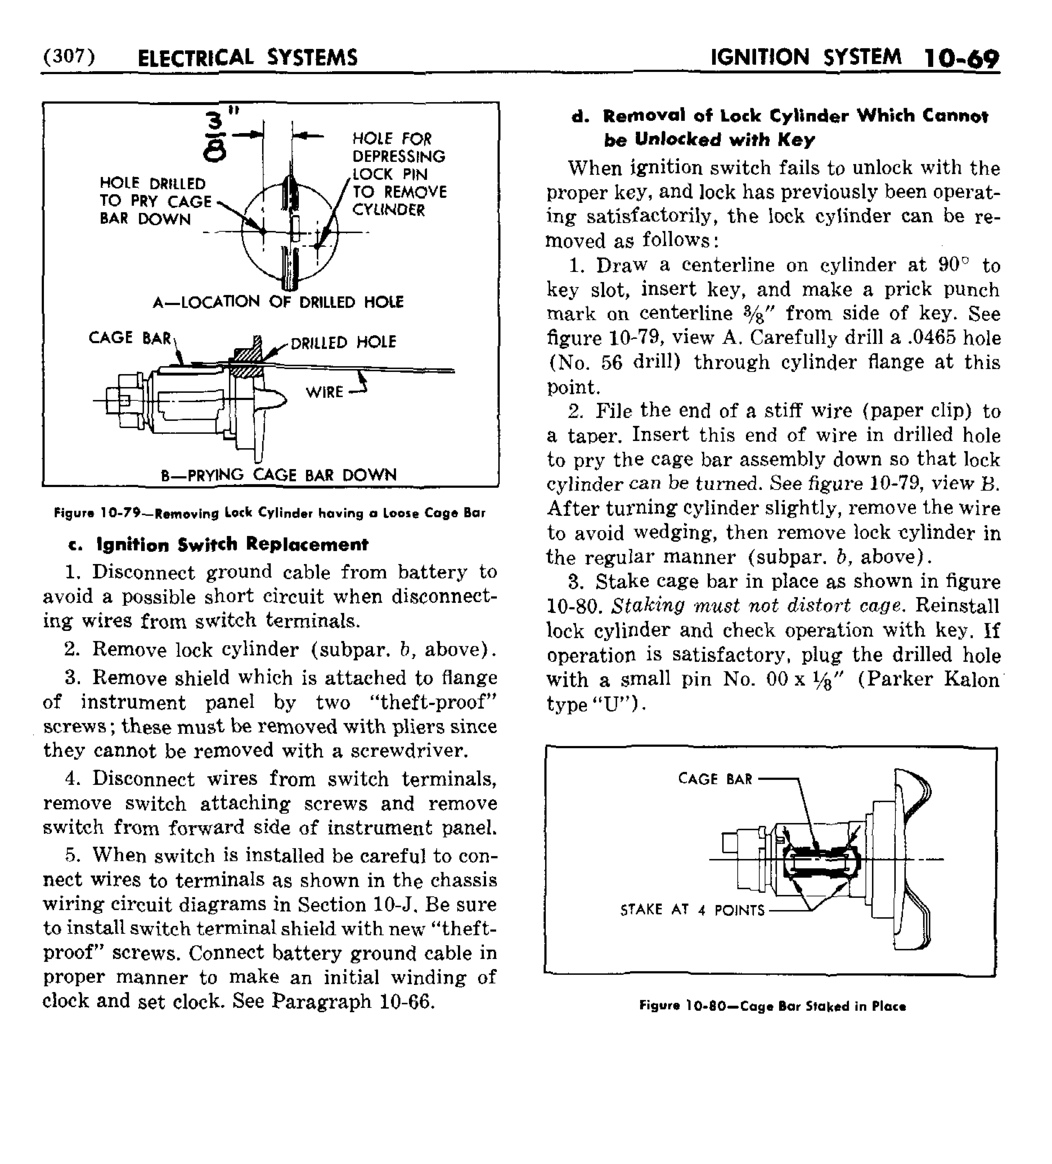 n_11 1950 Buick Shop Manual - Electrical Systems-069-069.jpg